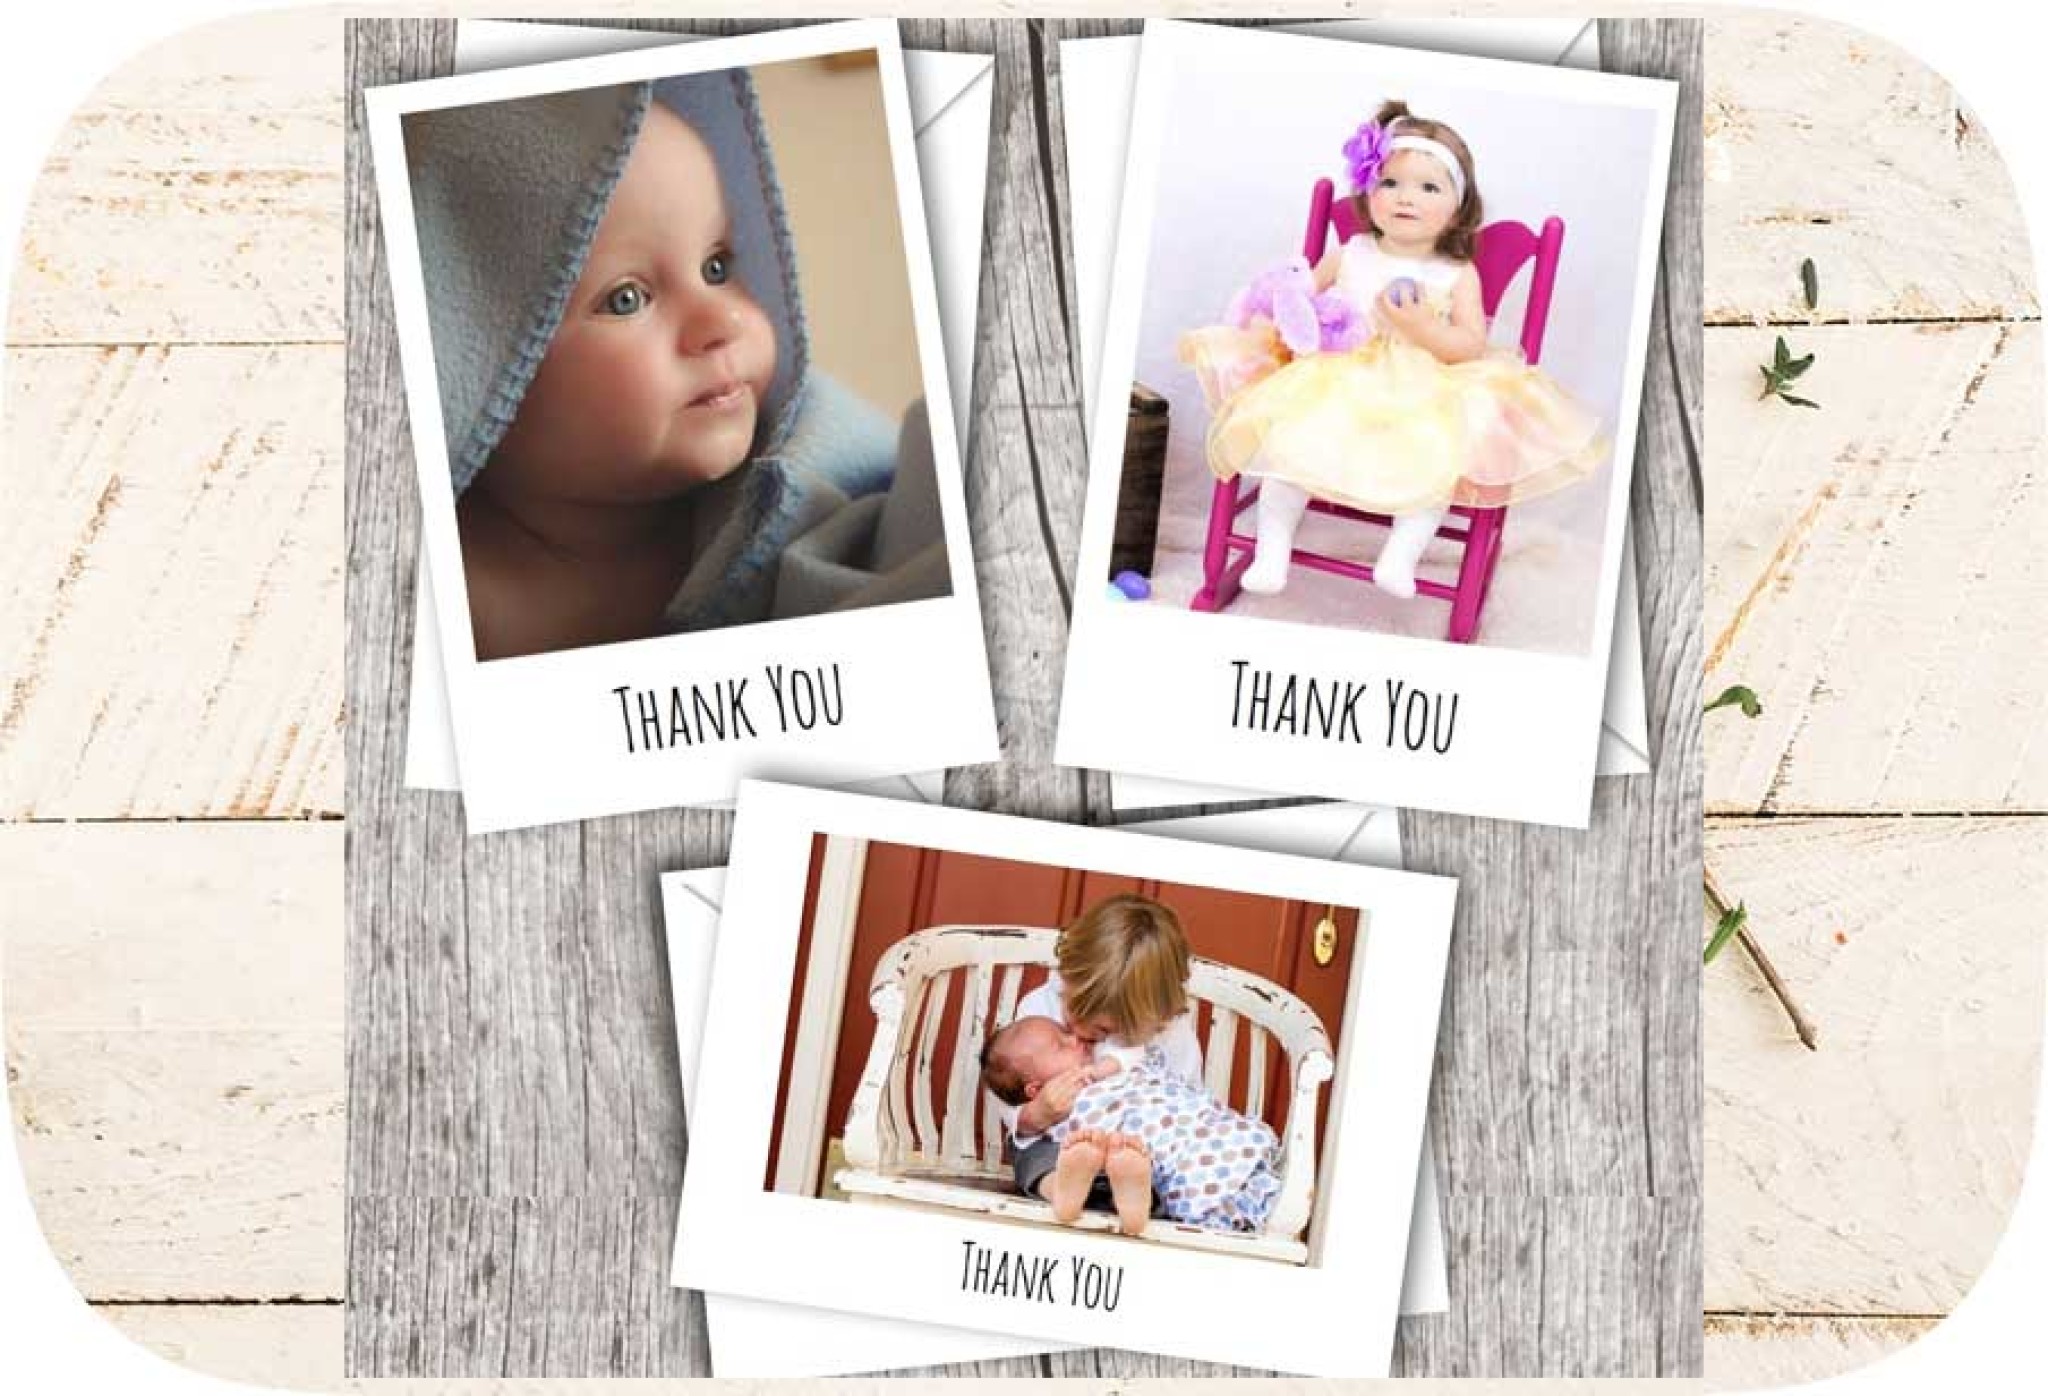 Thank-you-cards-personalised.jpg